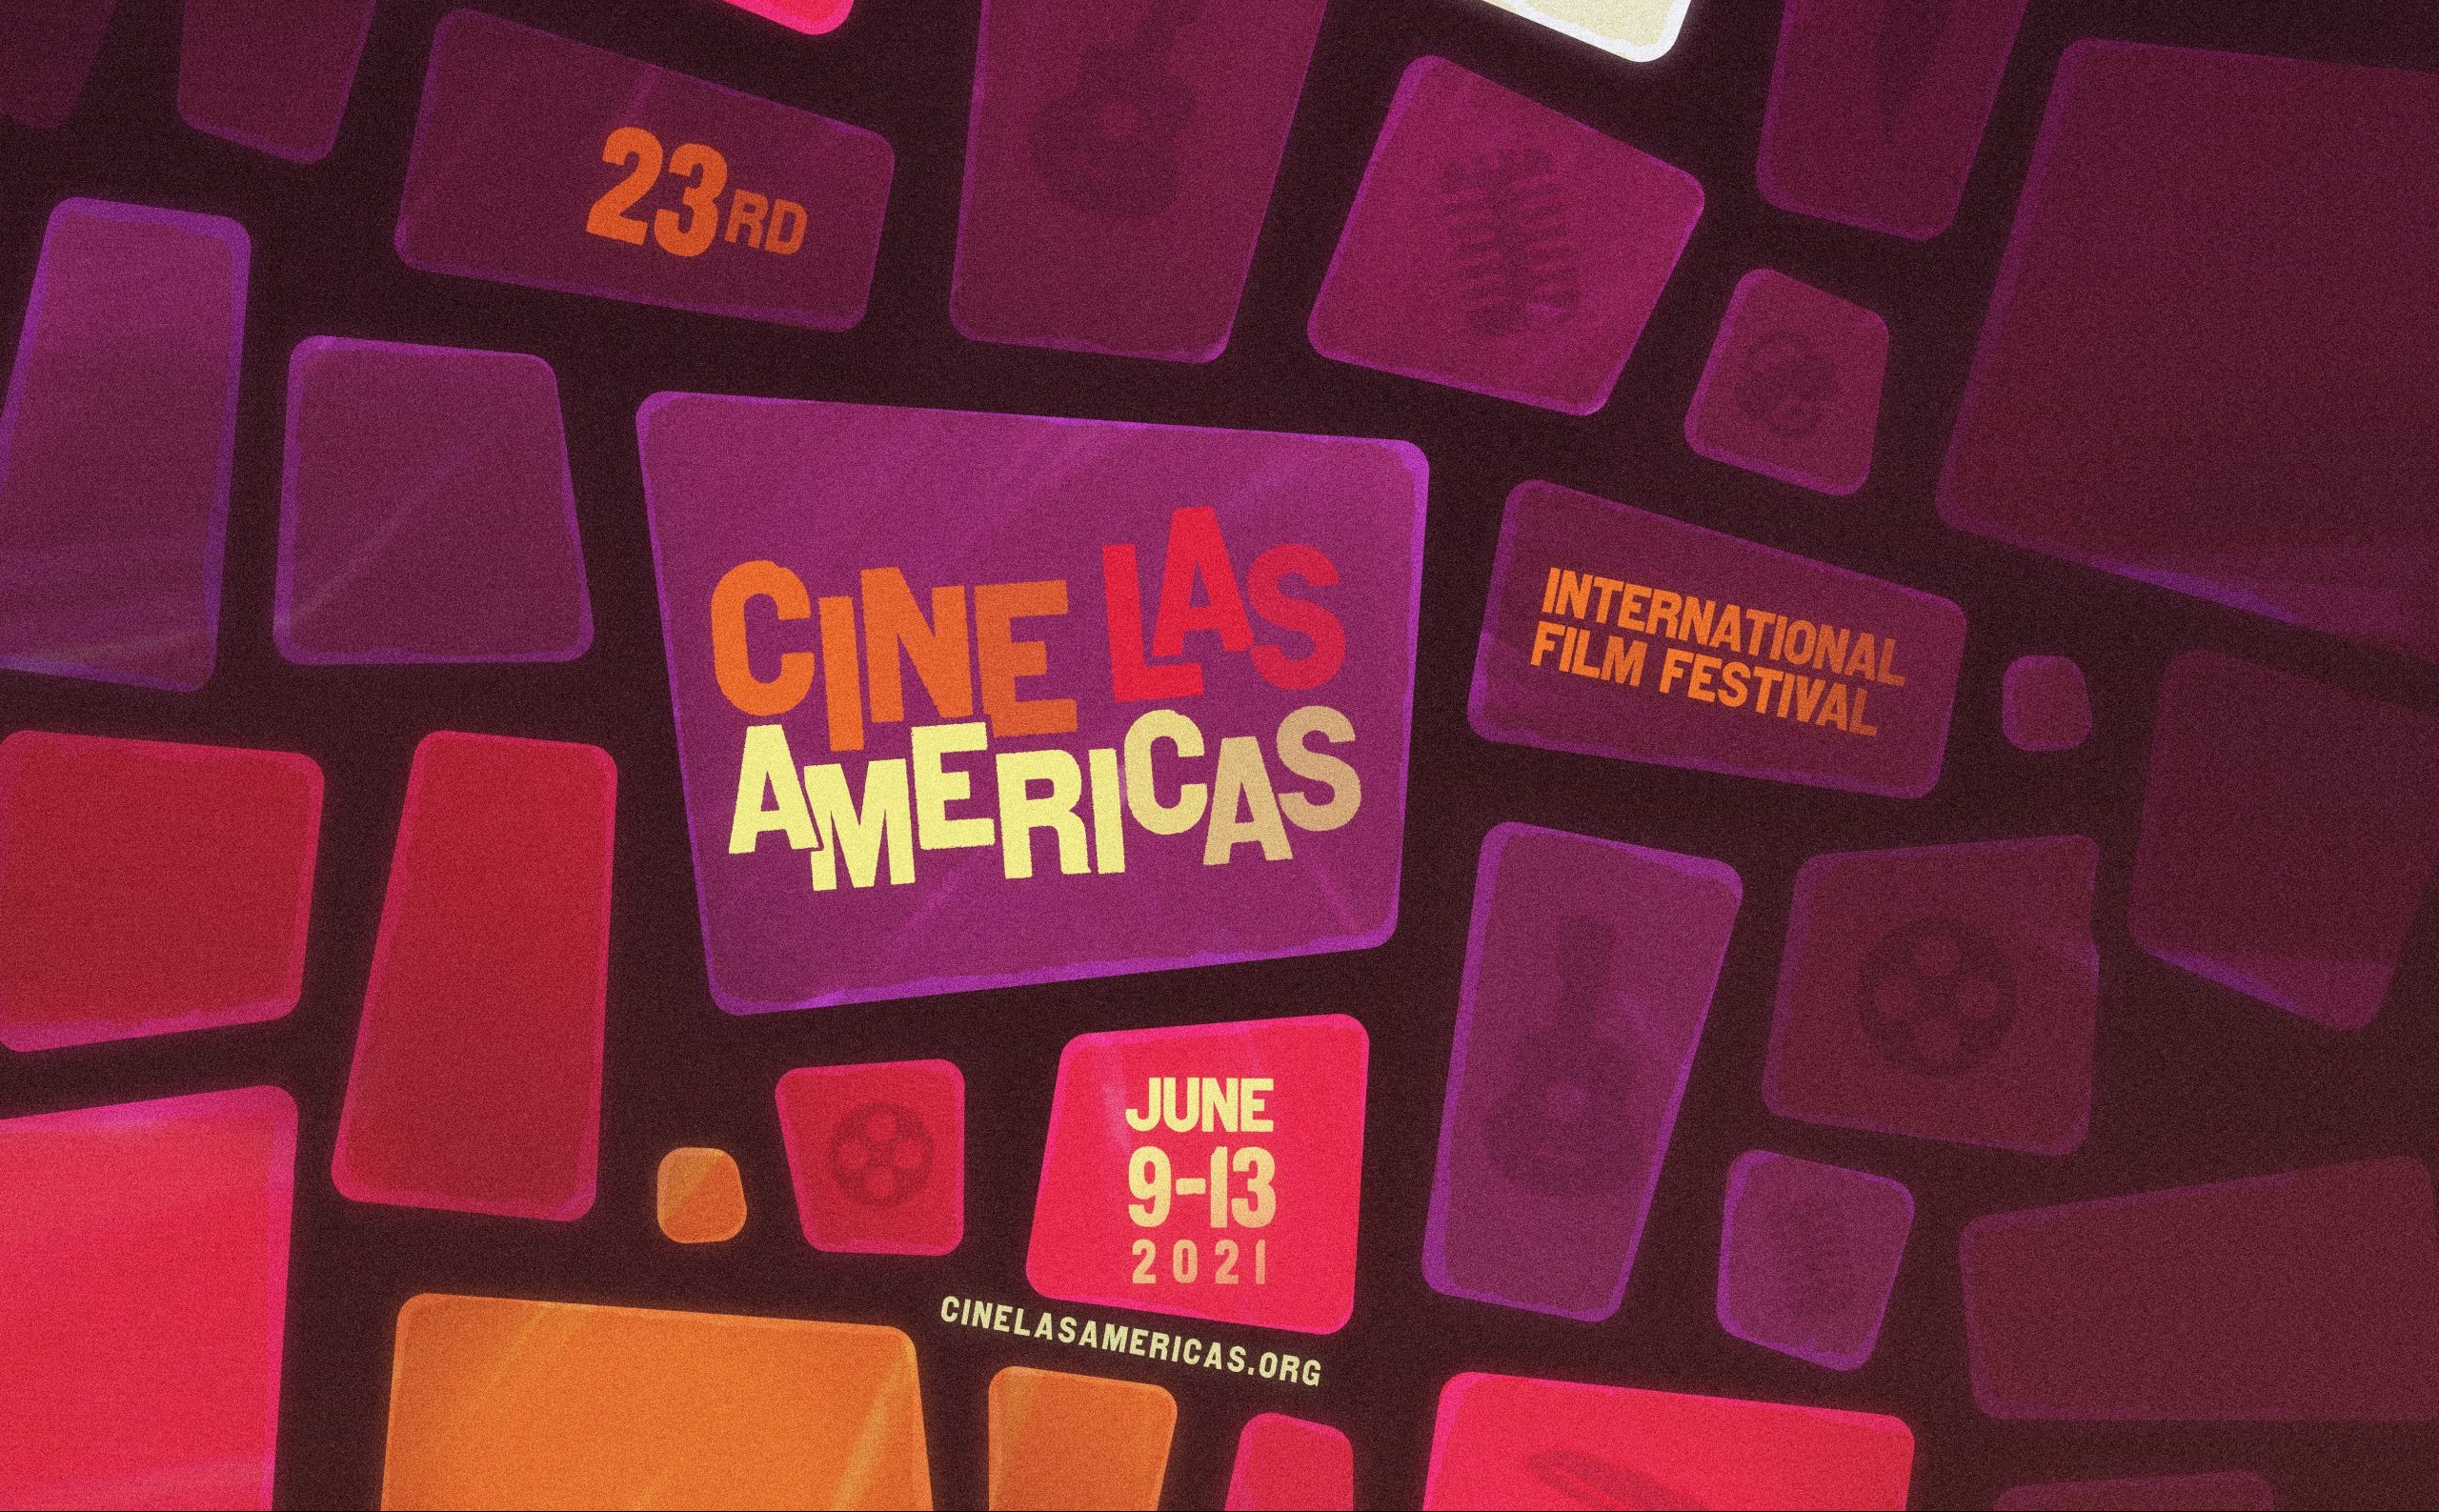 Cine Las Americas International Film Festival poster with various squares representing the virtual component of the festival.